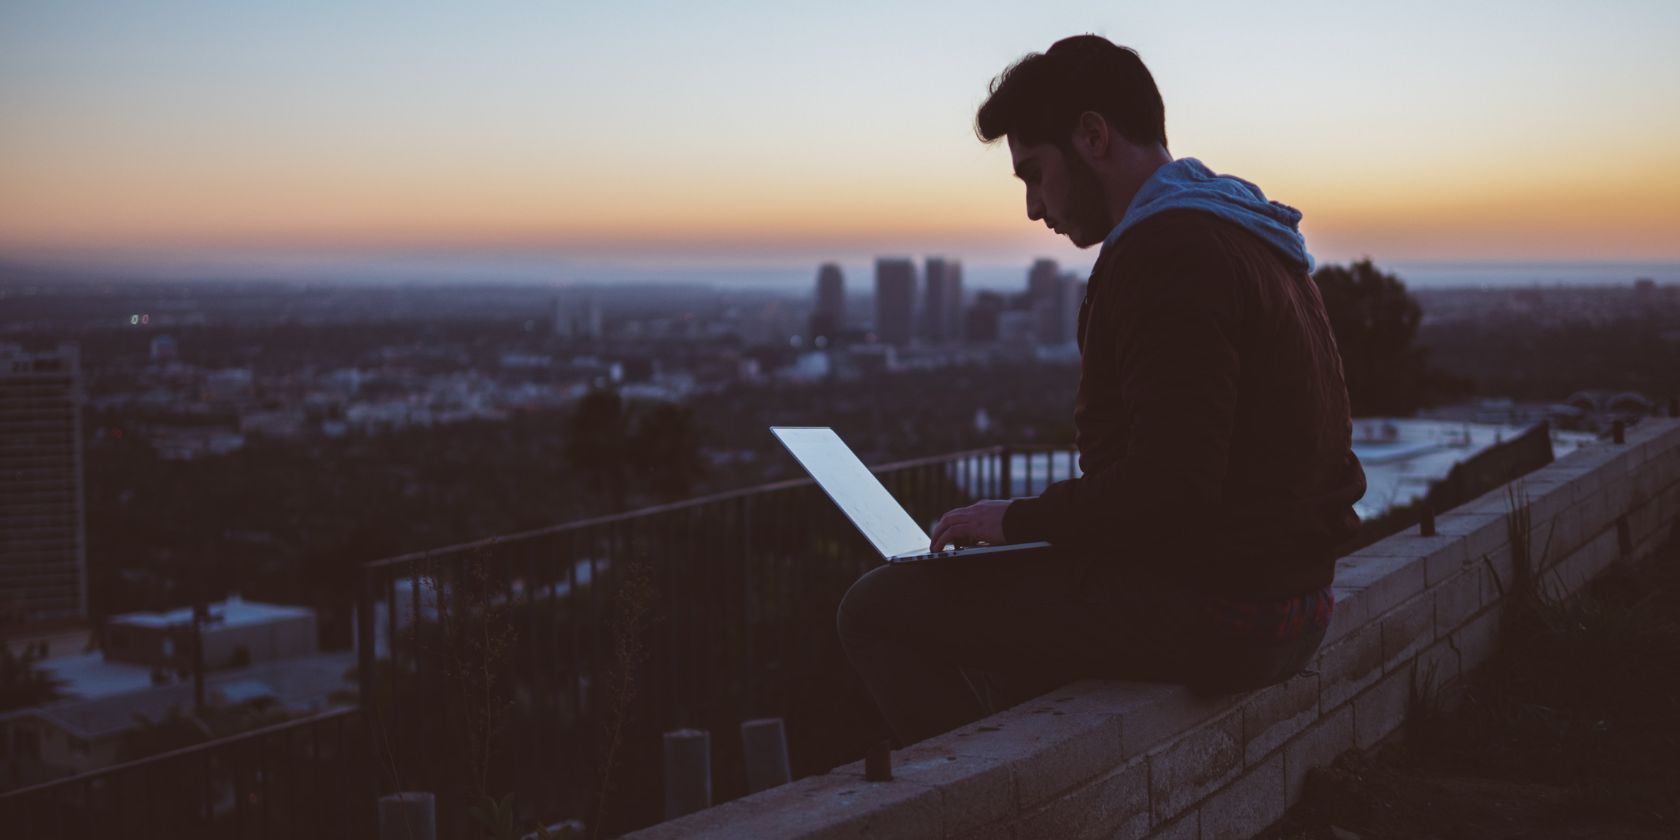 Man working on his laptop while sitting on top of a wall overlooking a city at sunset